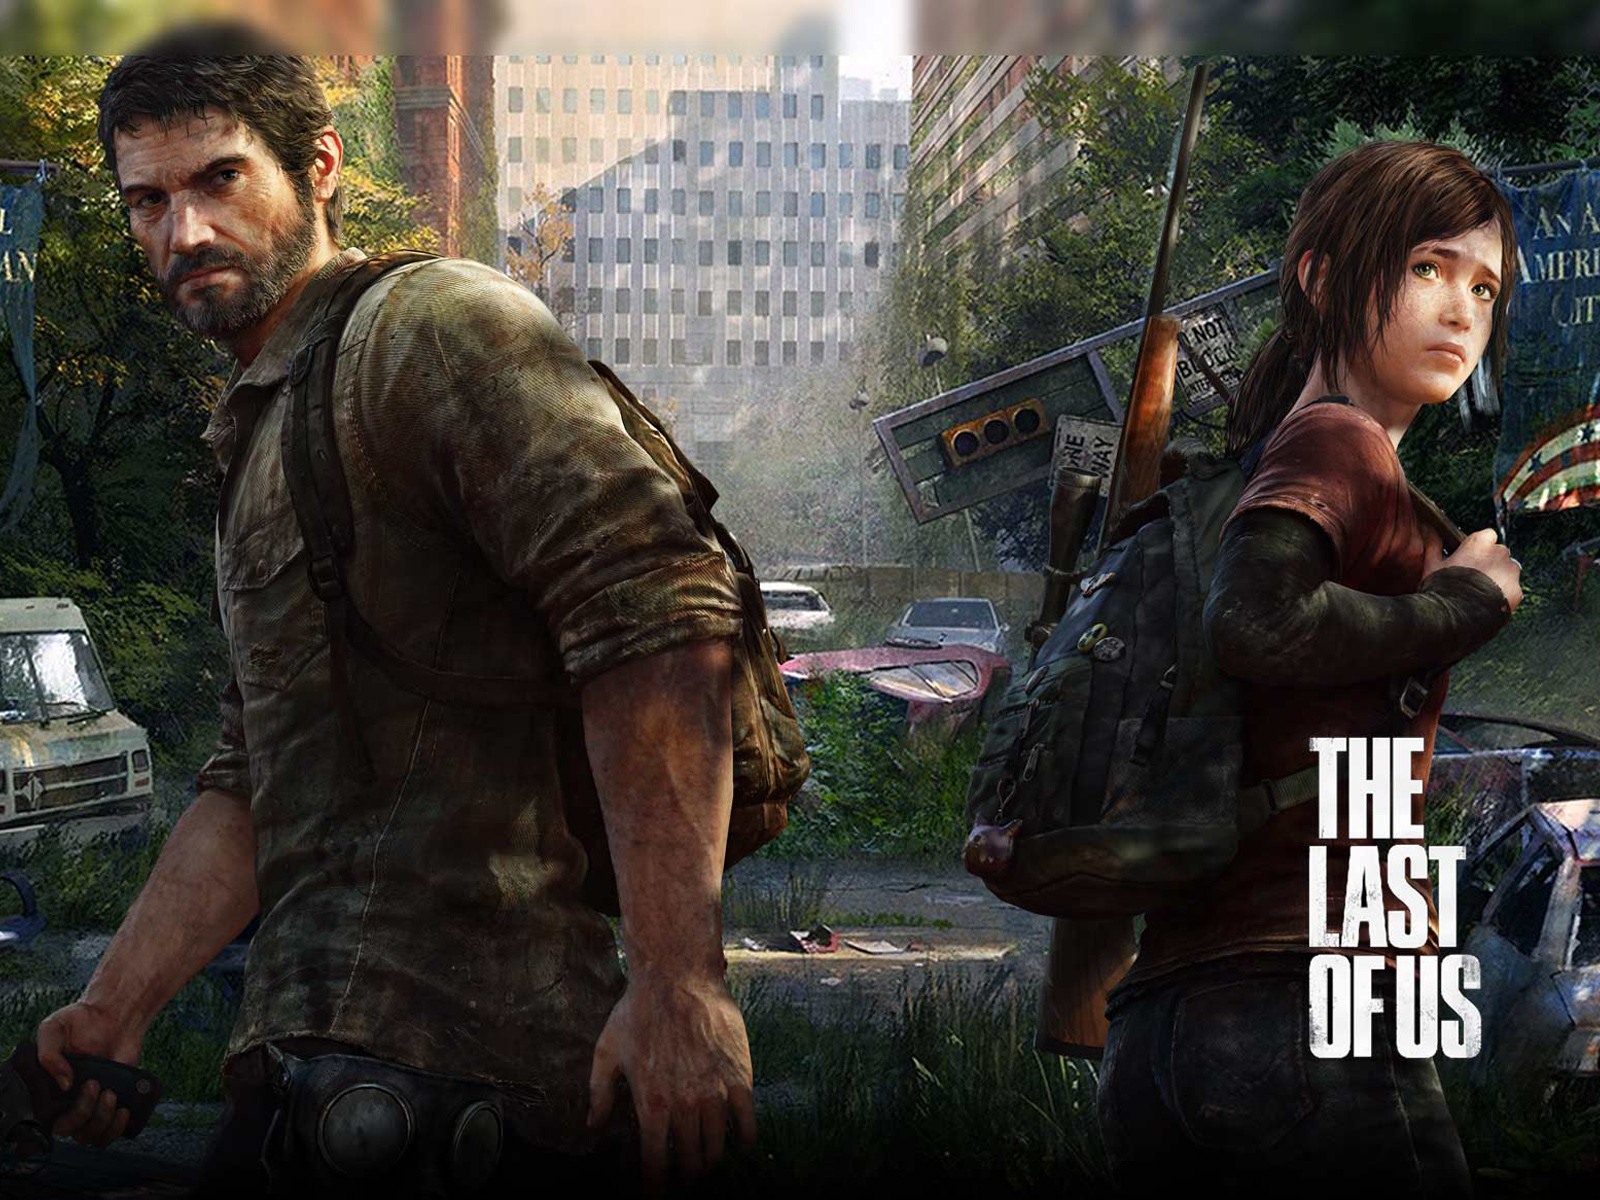 The Last of US HD game wallpapers #5 - 1600x1200